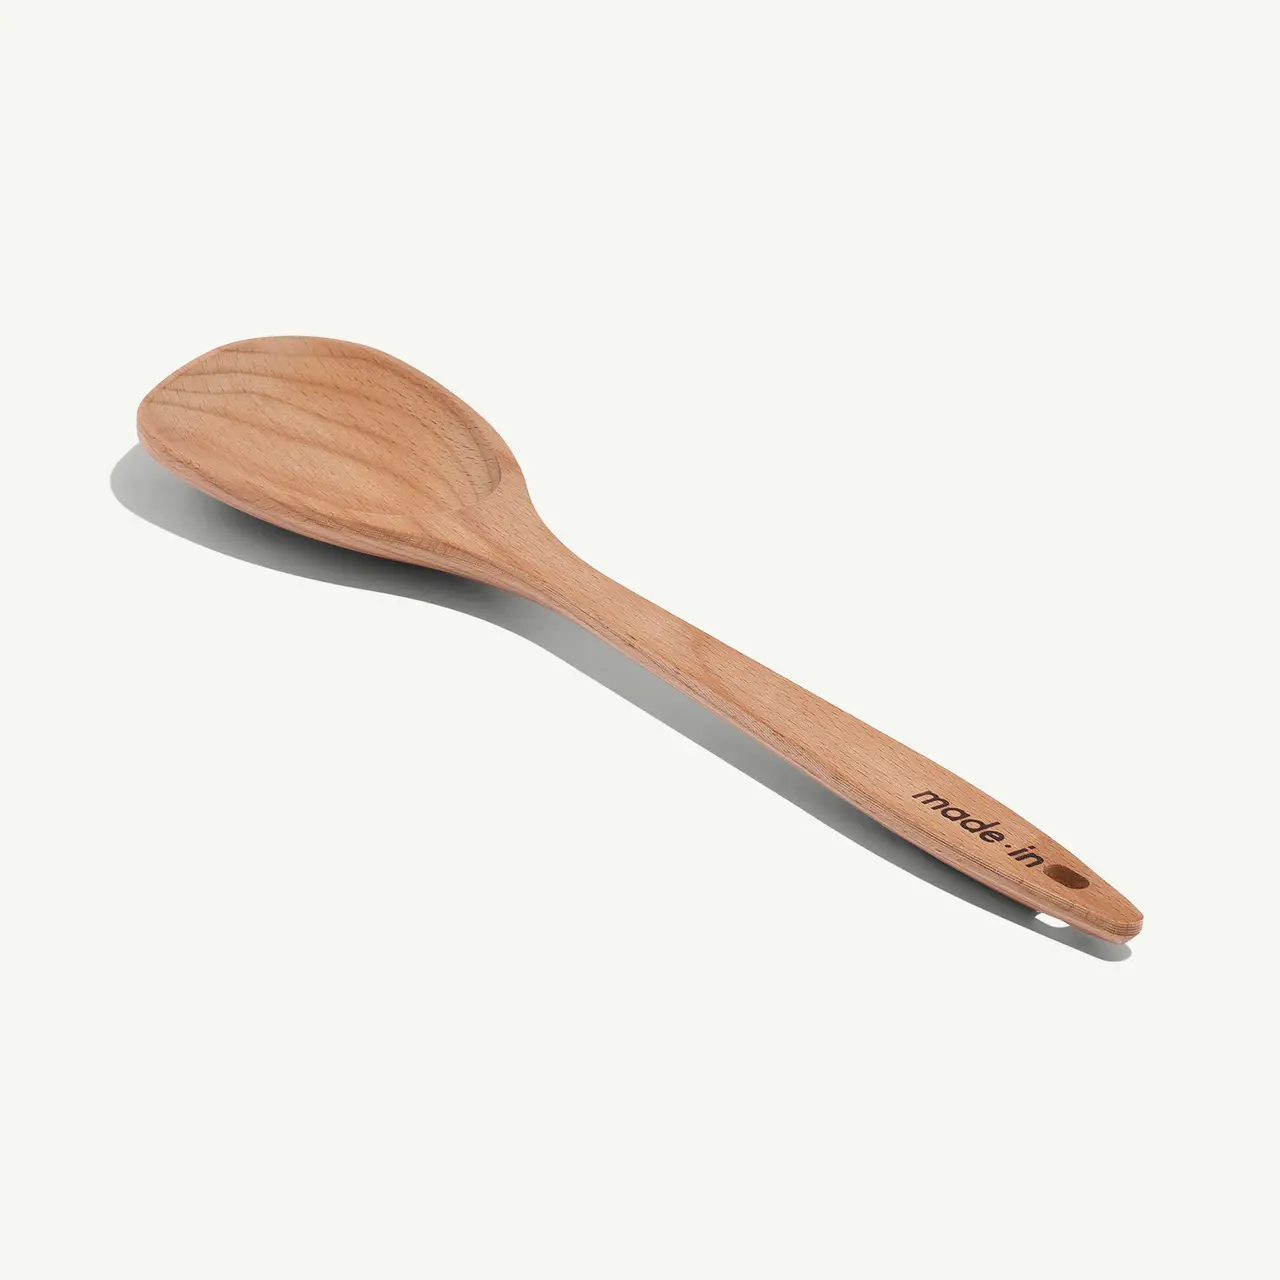 A simple wooden spoon rests on a white background.